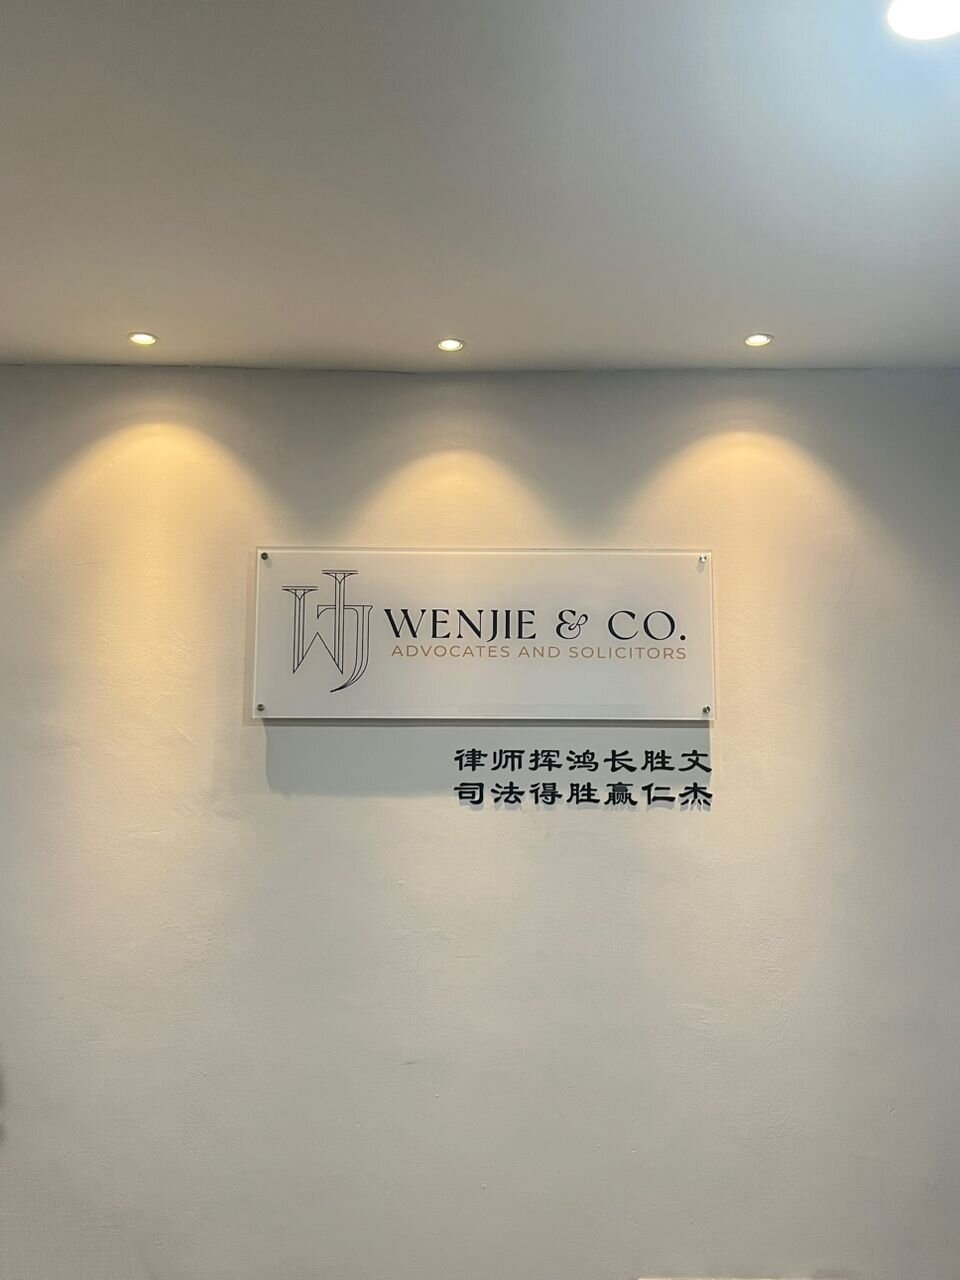 WenJie & Co. Law Firm | 律师楼 | 律师事务所 cover photo